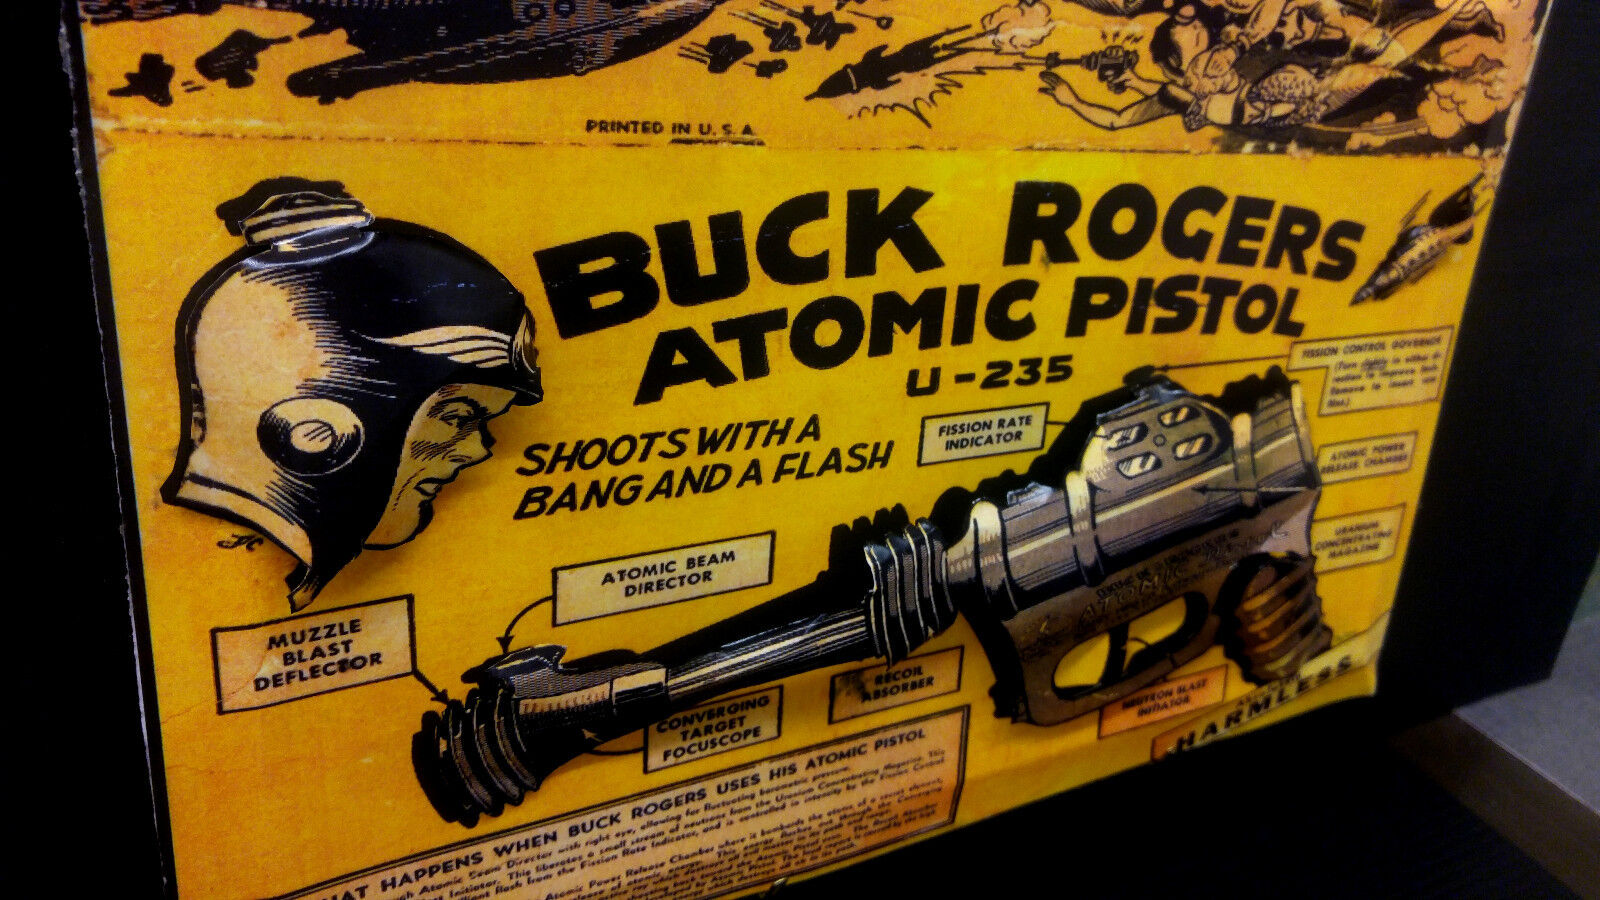 Buck Rogers Atomic Pistol Box Cover Art Poster in 3-D size11x17